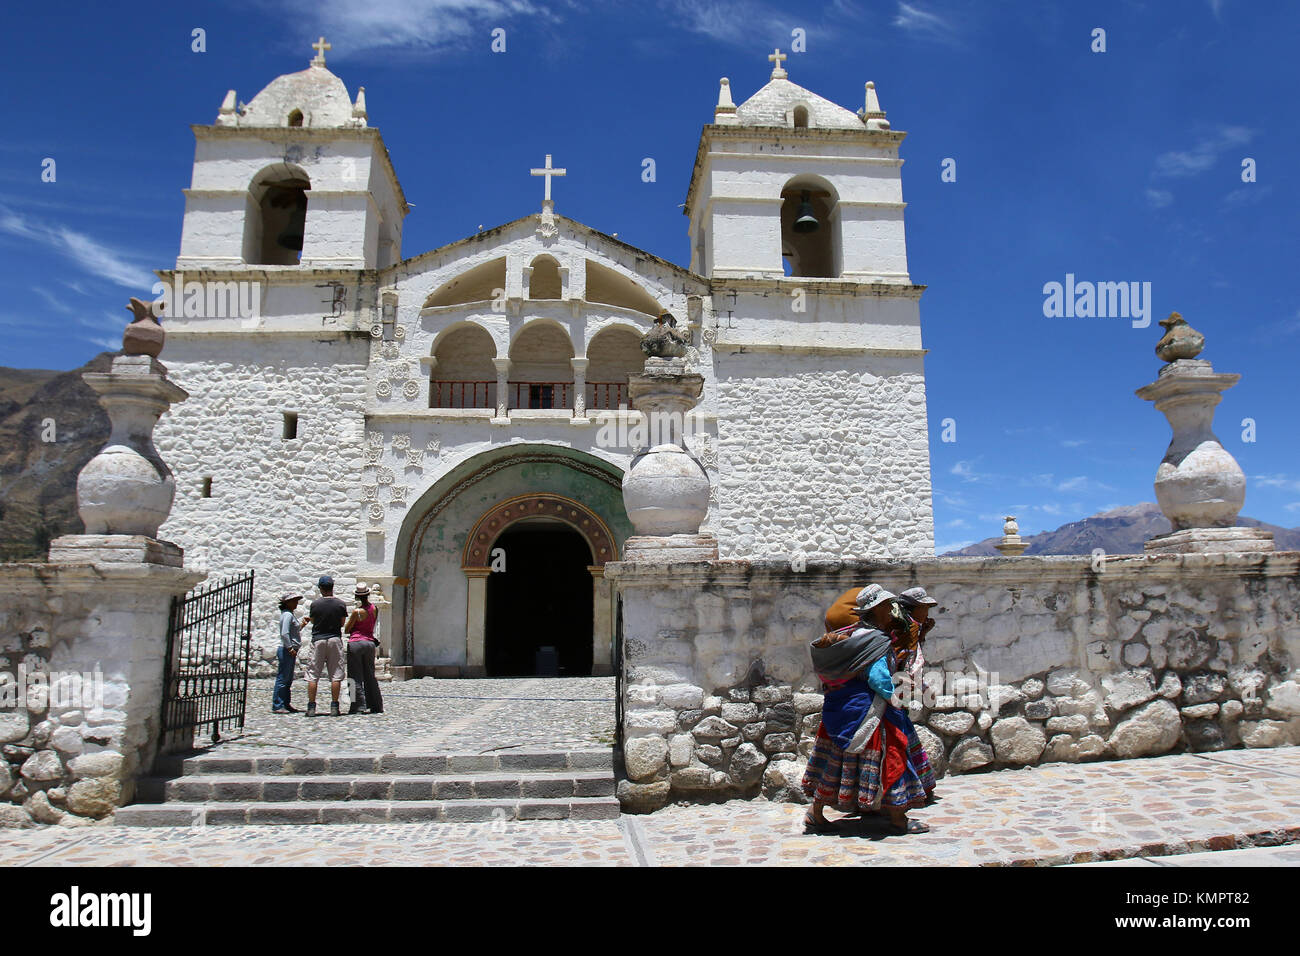 Maca ( Peru) November, 18 th 2015; Maca chruch on the Colca Canyon in the Andes Cordilleras Credit: Sebastien Lapeyrere/Alamy Live News. Stock Photo